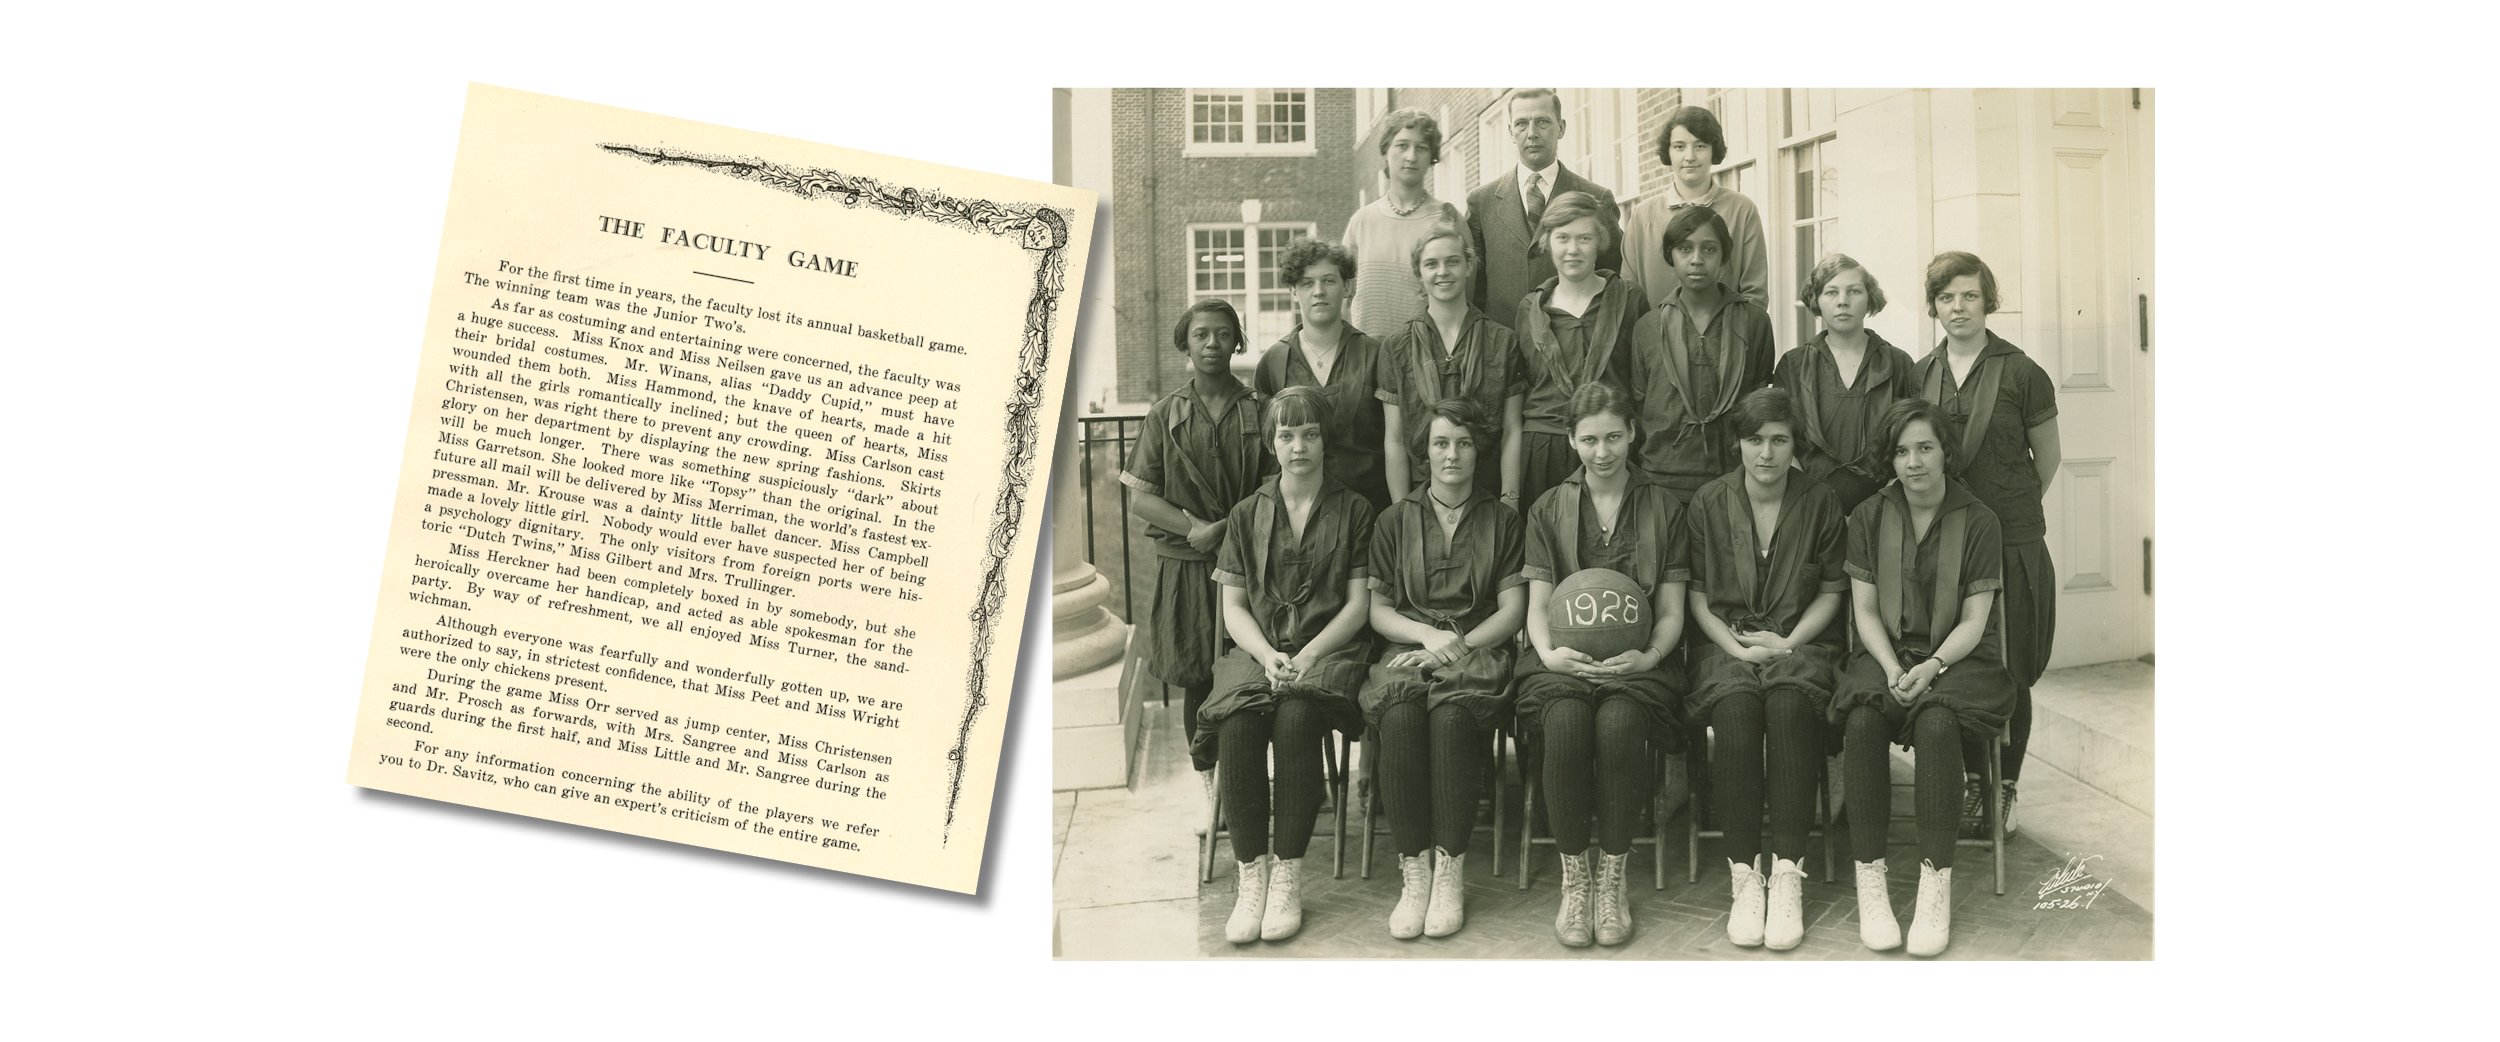 Image of the 1928 women's basketball team with a note about the student-faculty game.